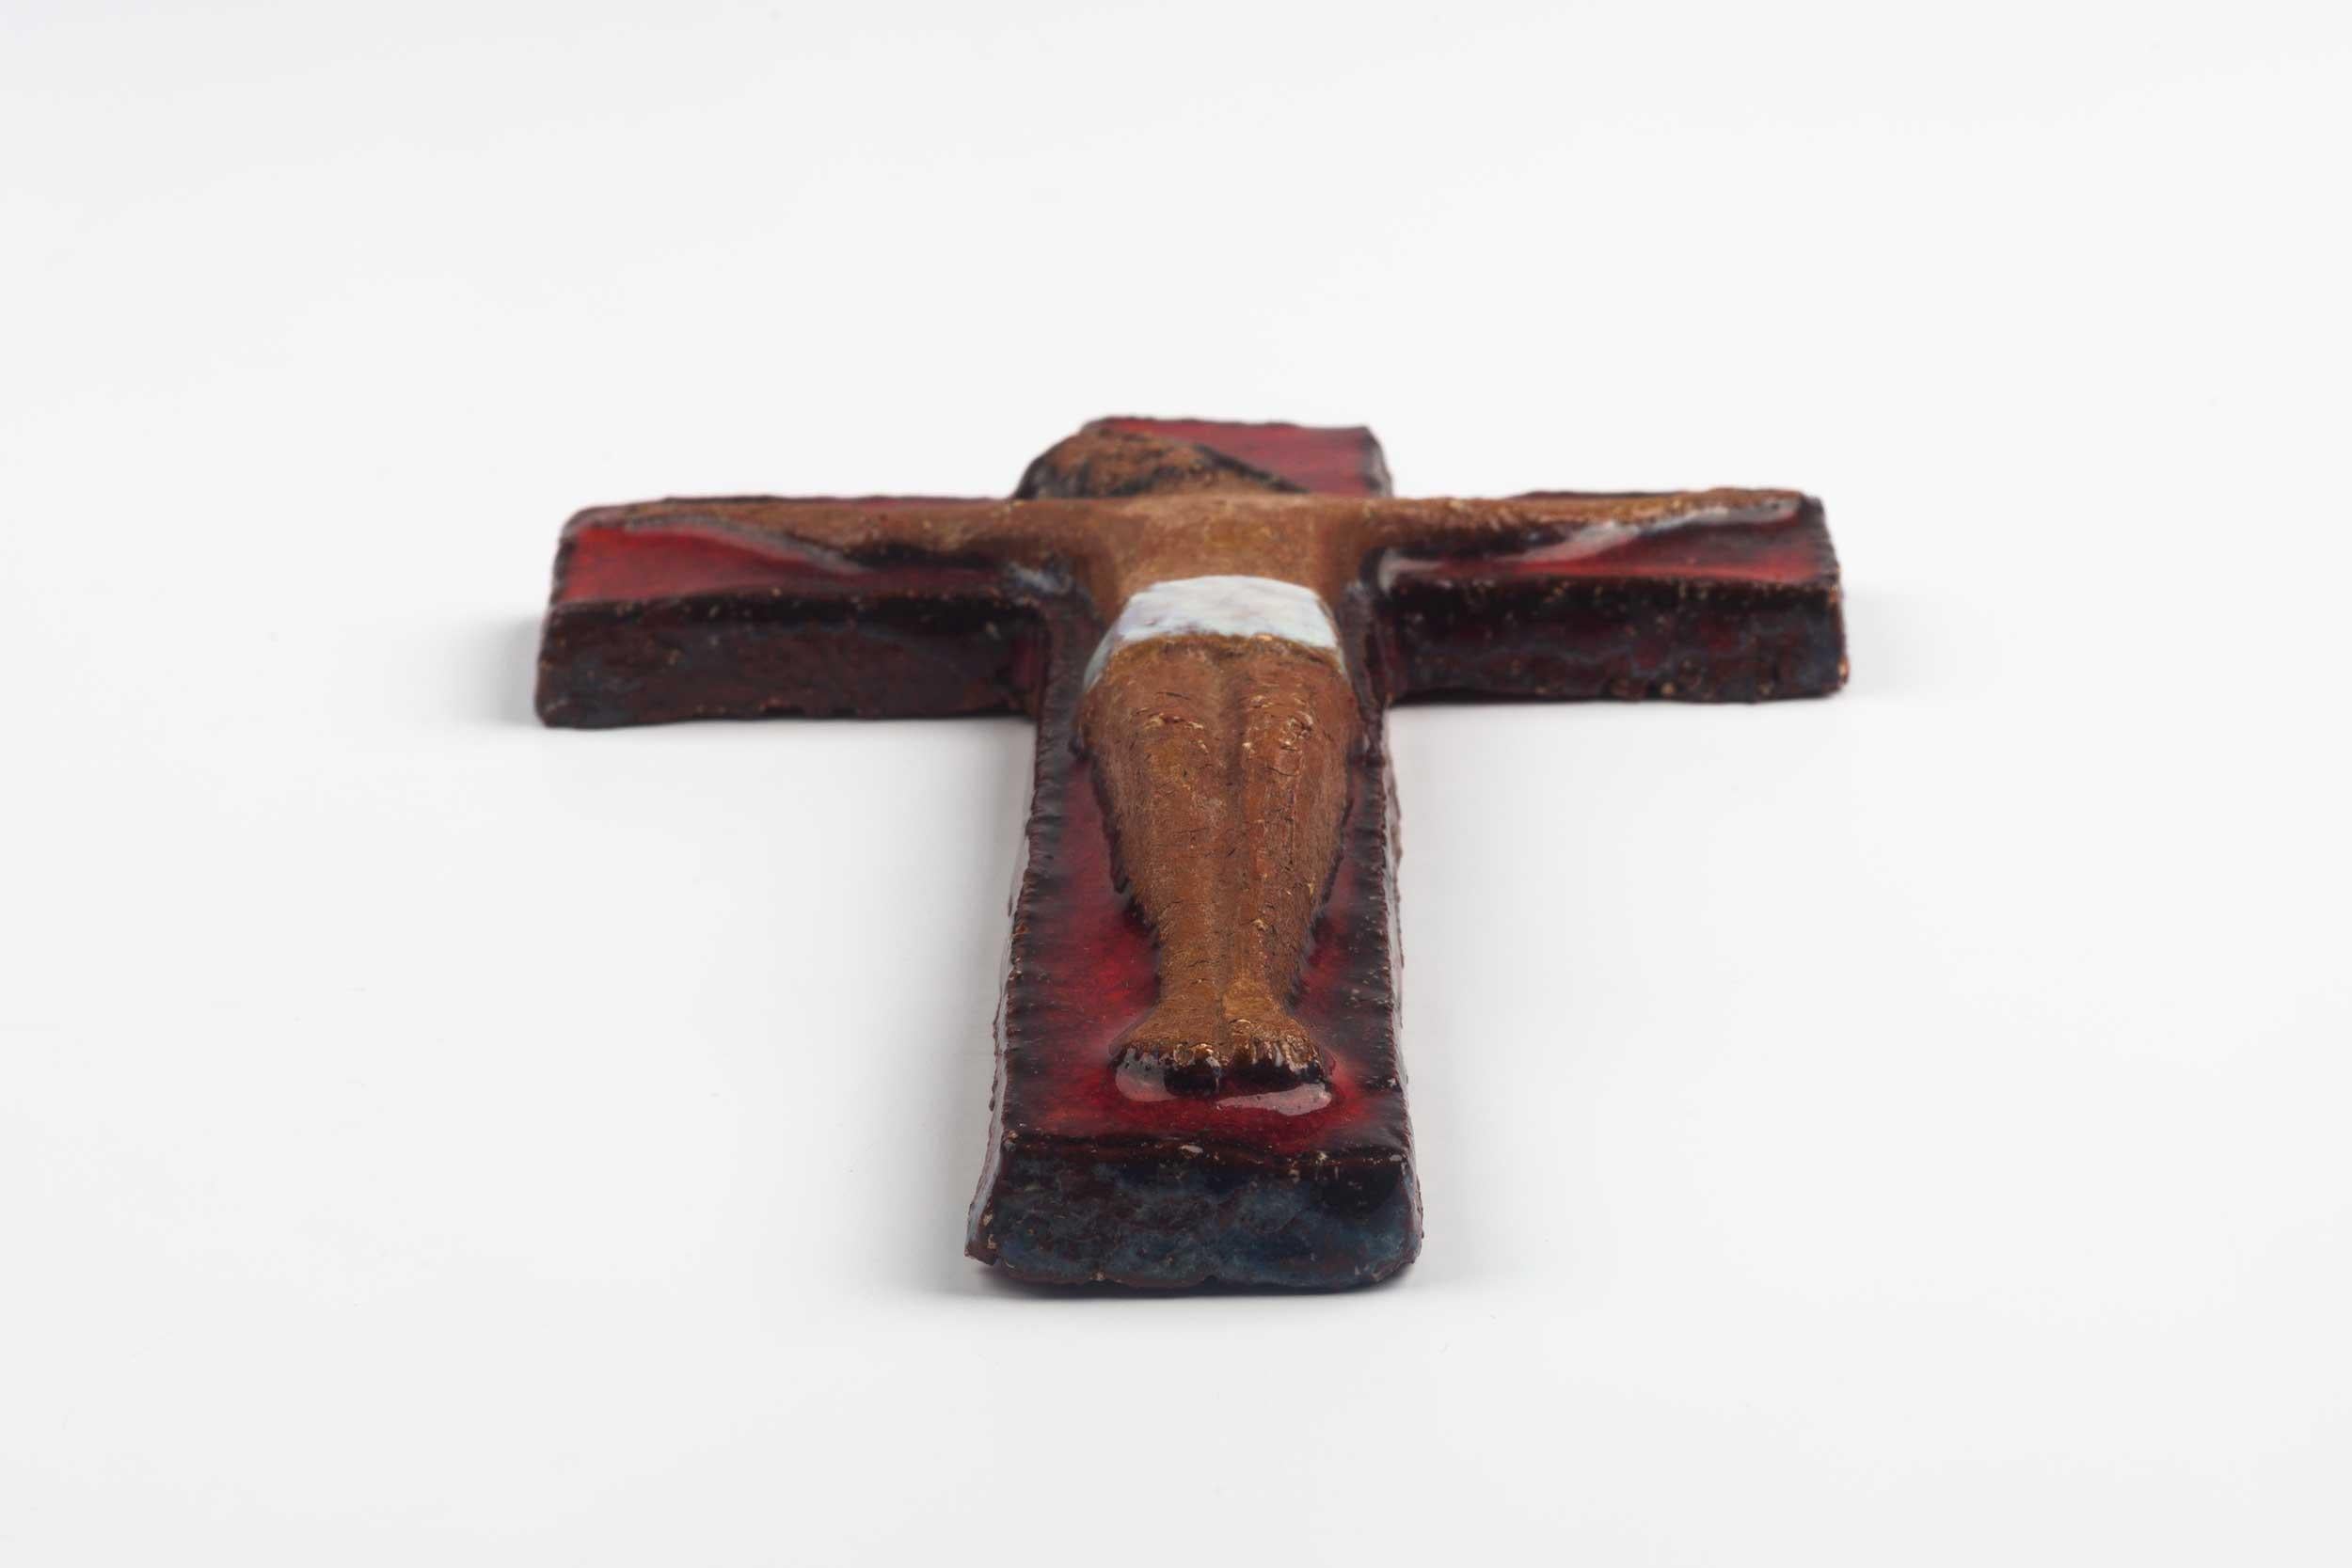 Midcentury European wall cross in glazed red paint and natural red clay Christ figure in relief. From a large collection of vintage crosses handmade by Flemish artisans.

From modernism to brutalism, the crosses in our collection range from being